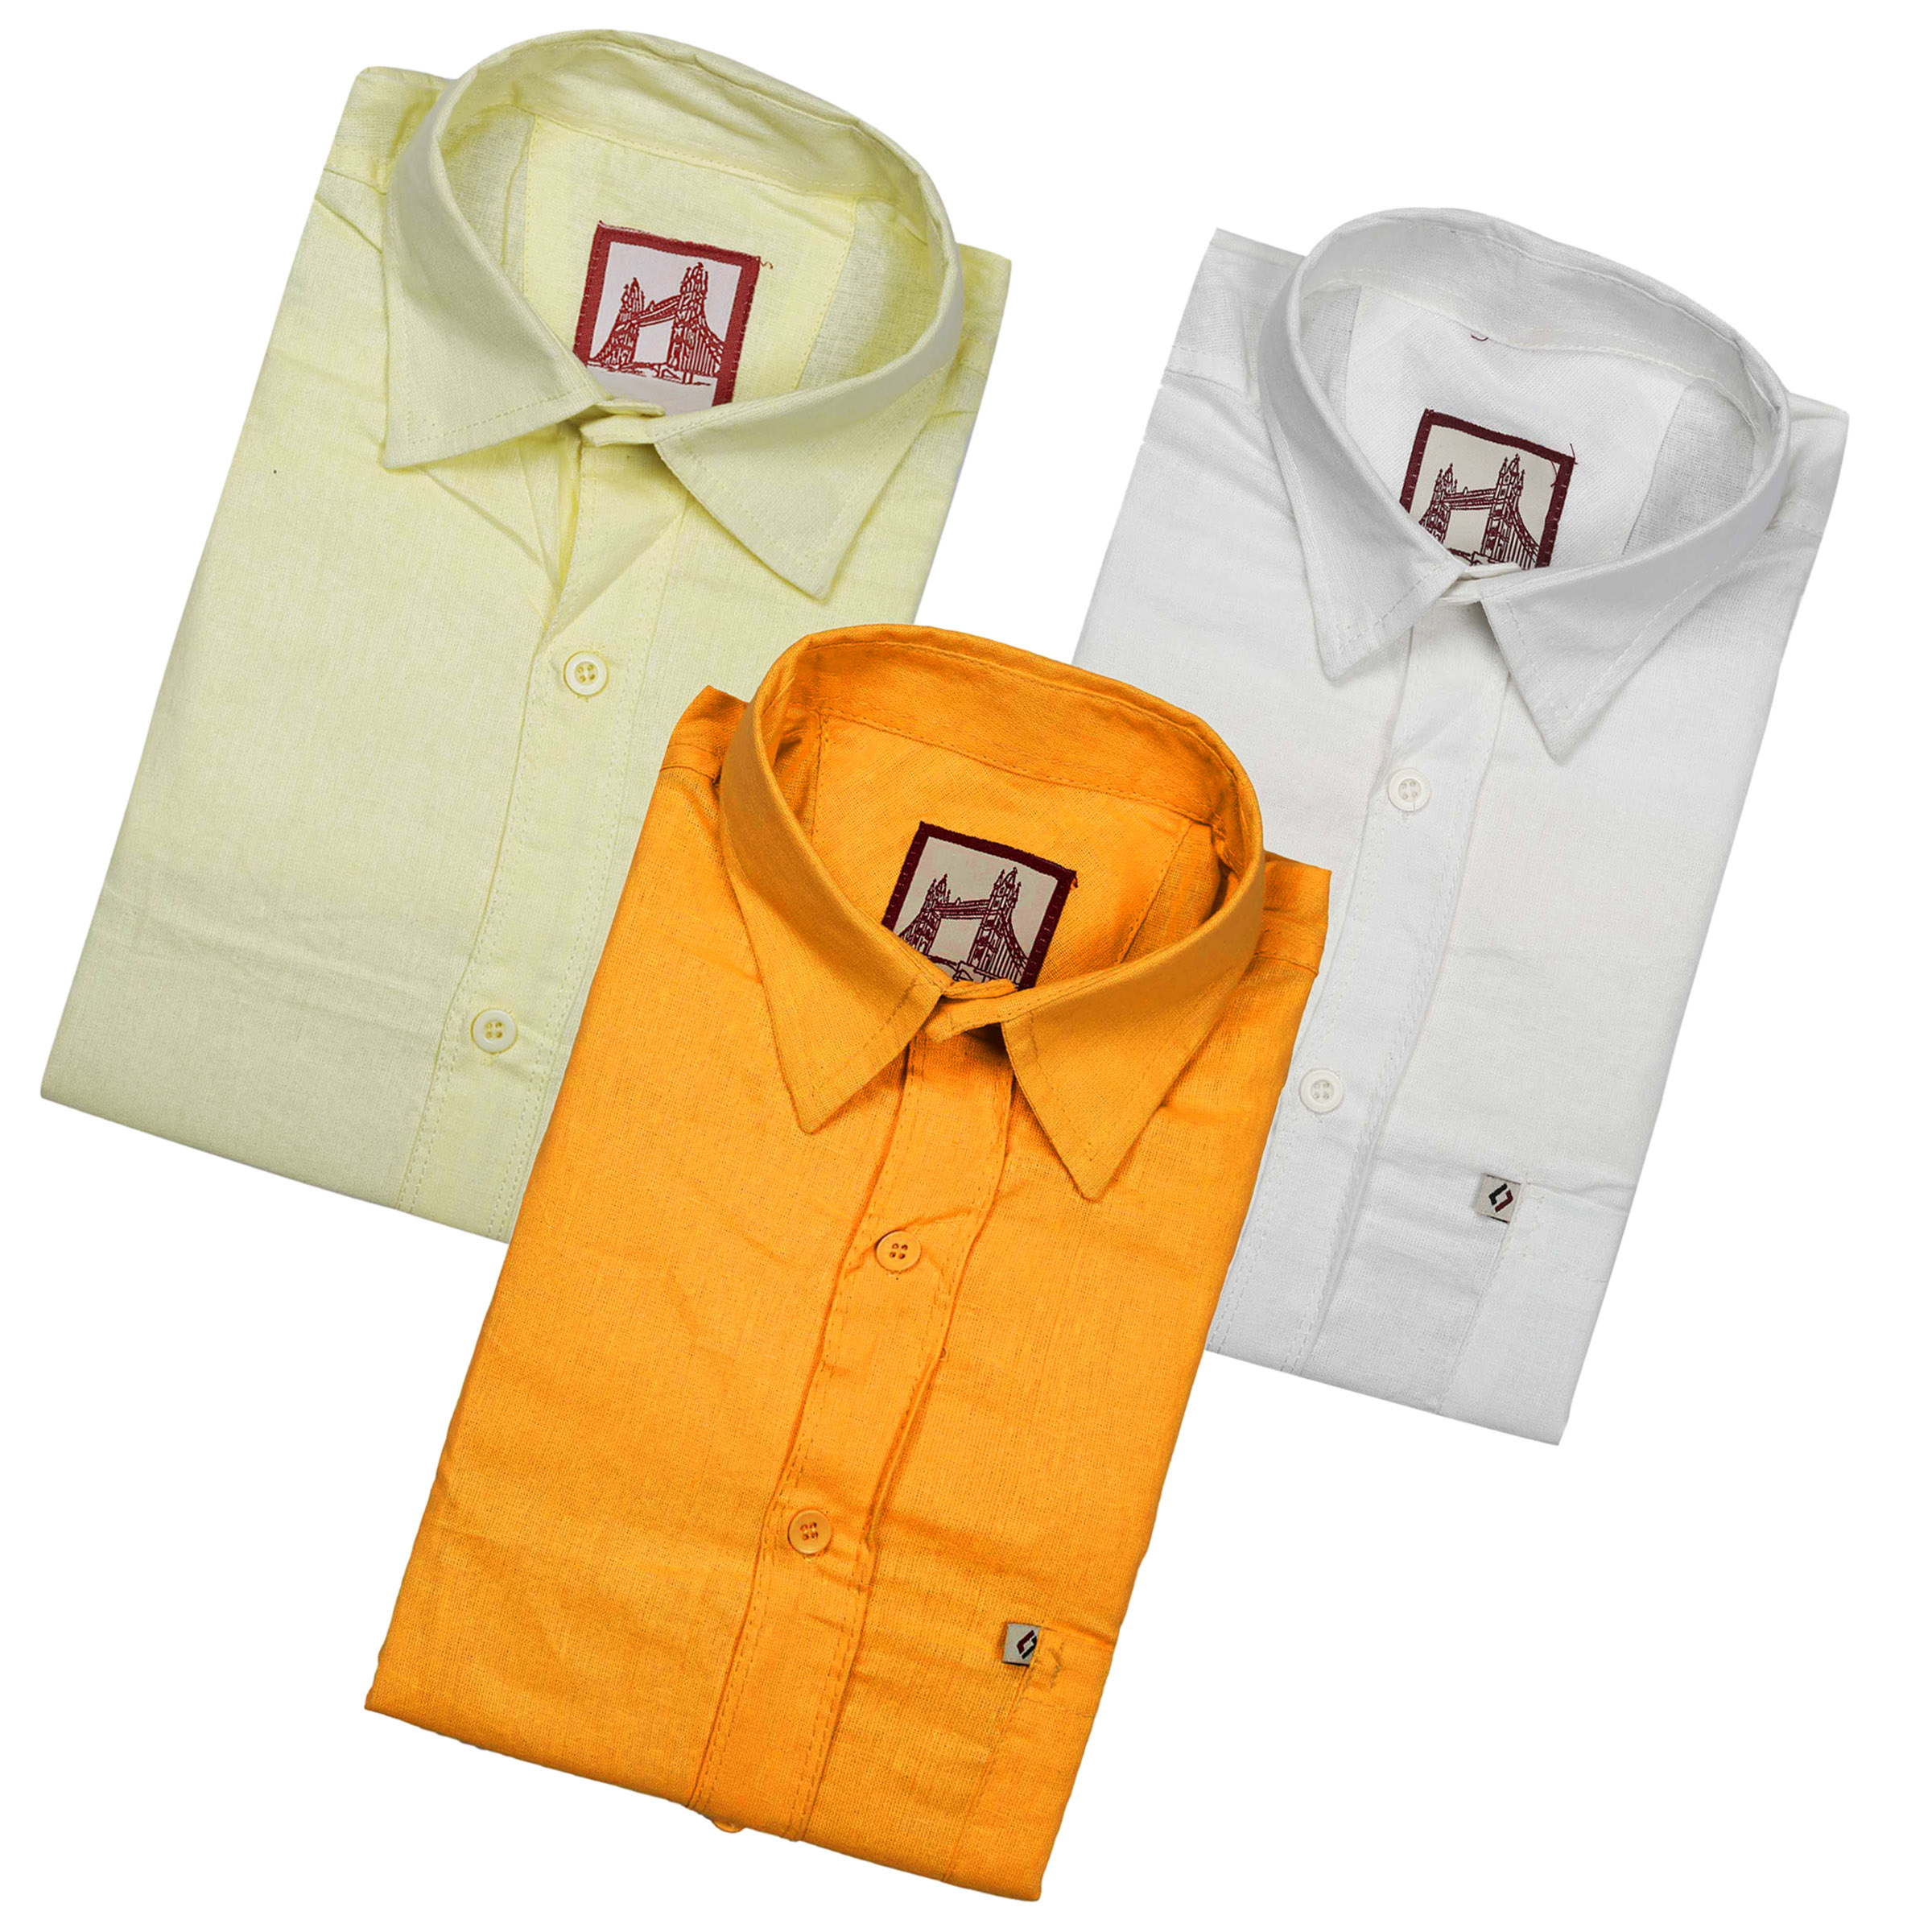 Buy Spain Style Solid Regular Fit Casual Shirts For Men's Pack of 3 ...